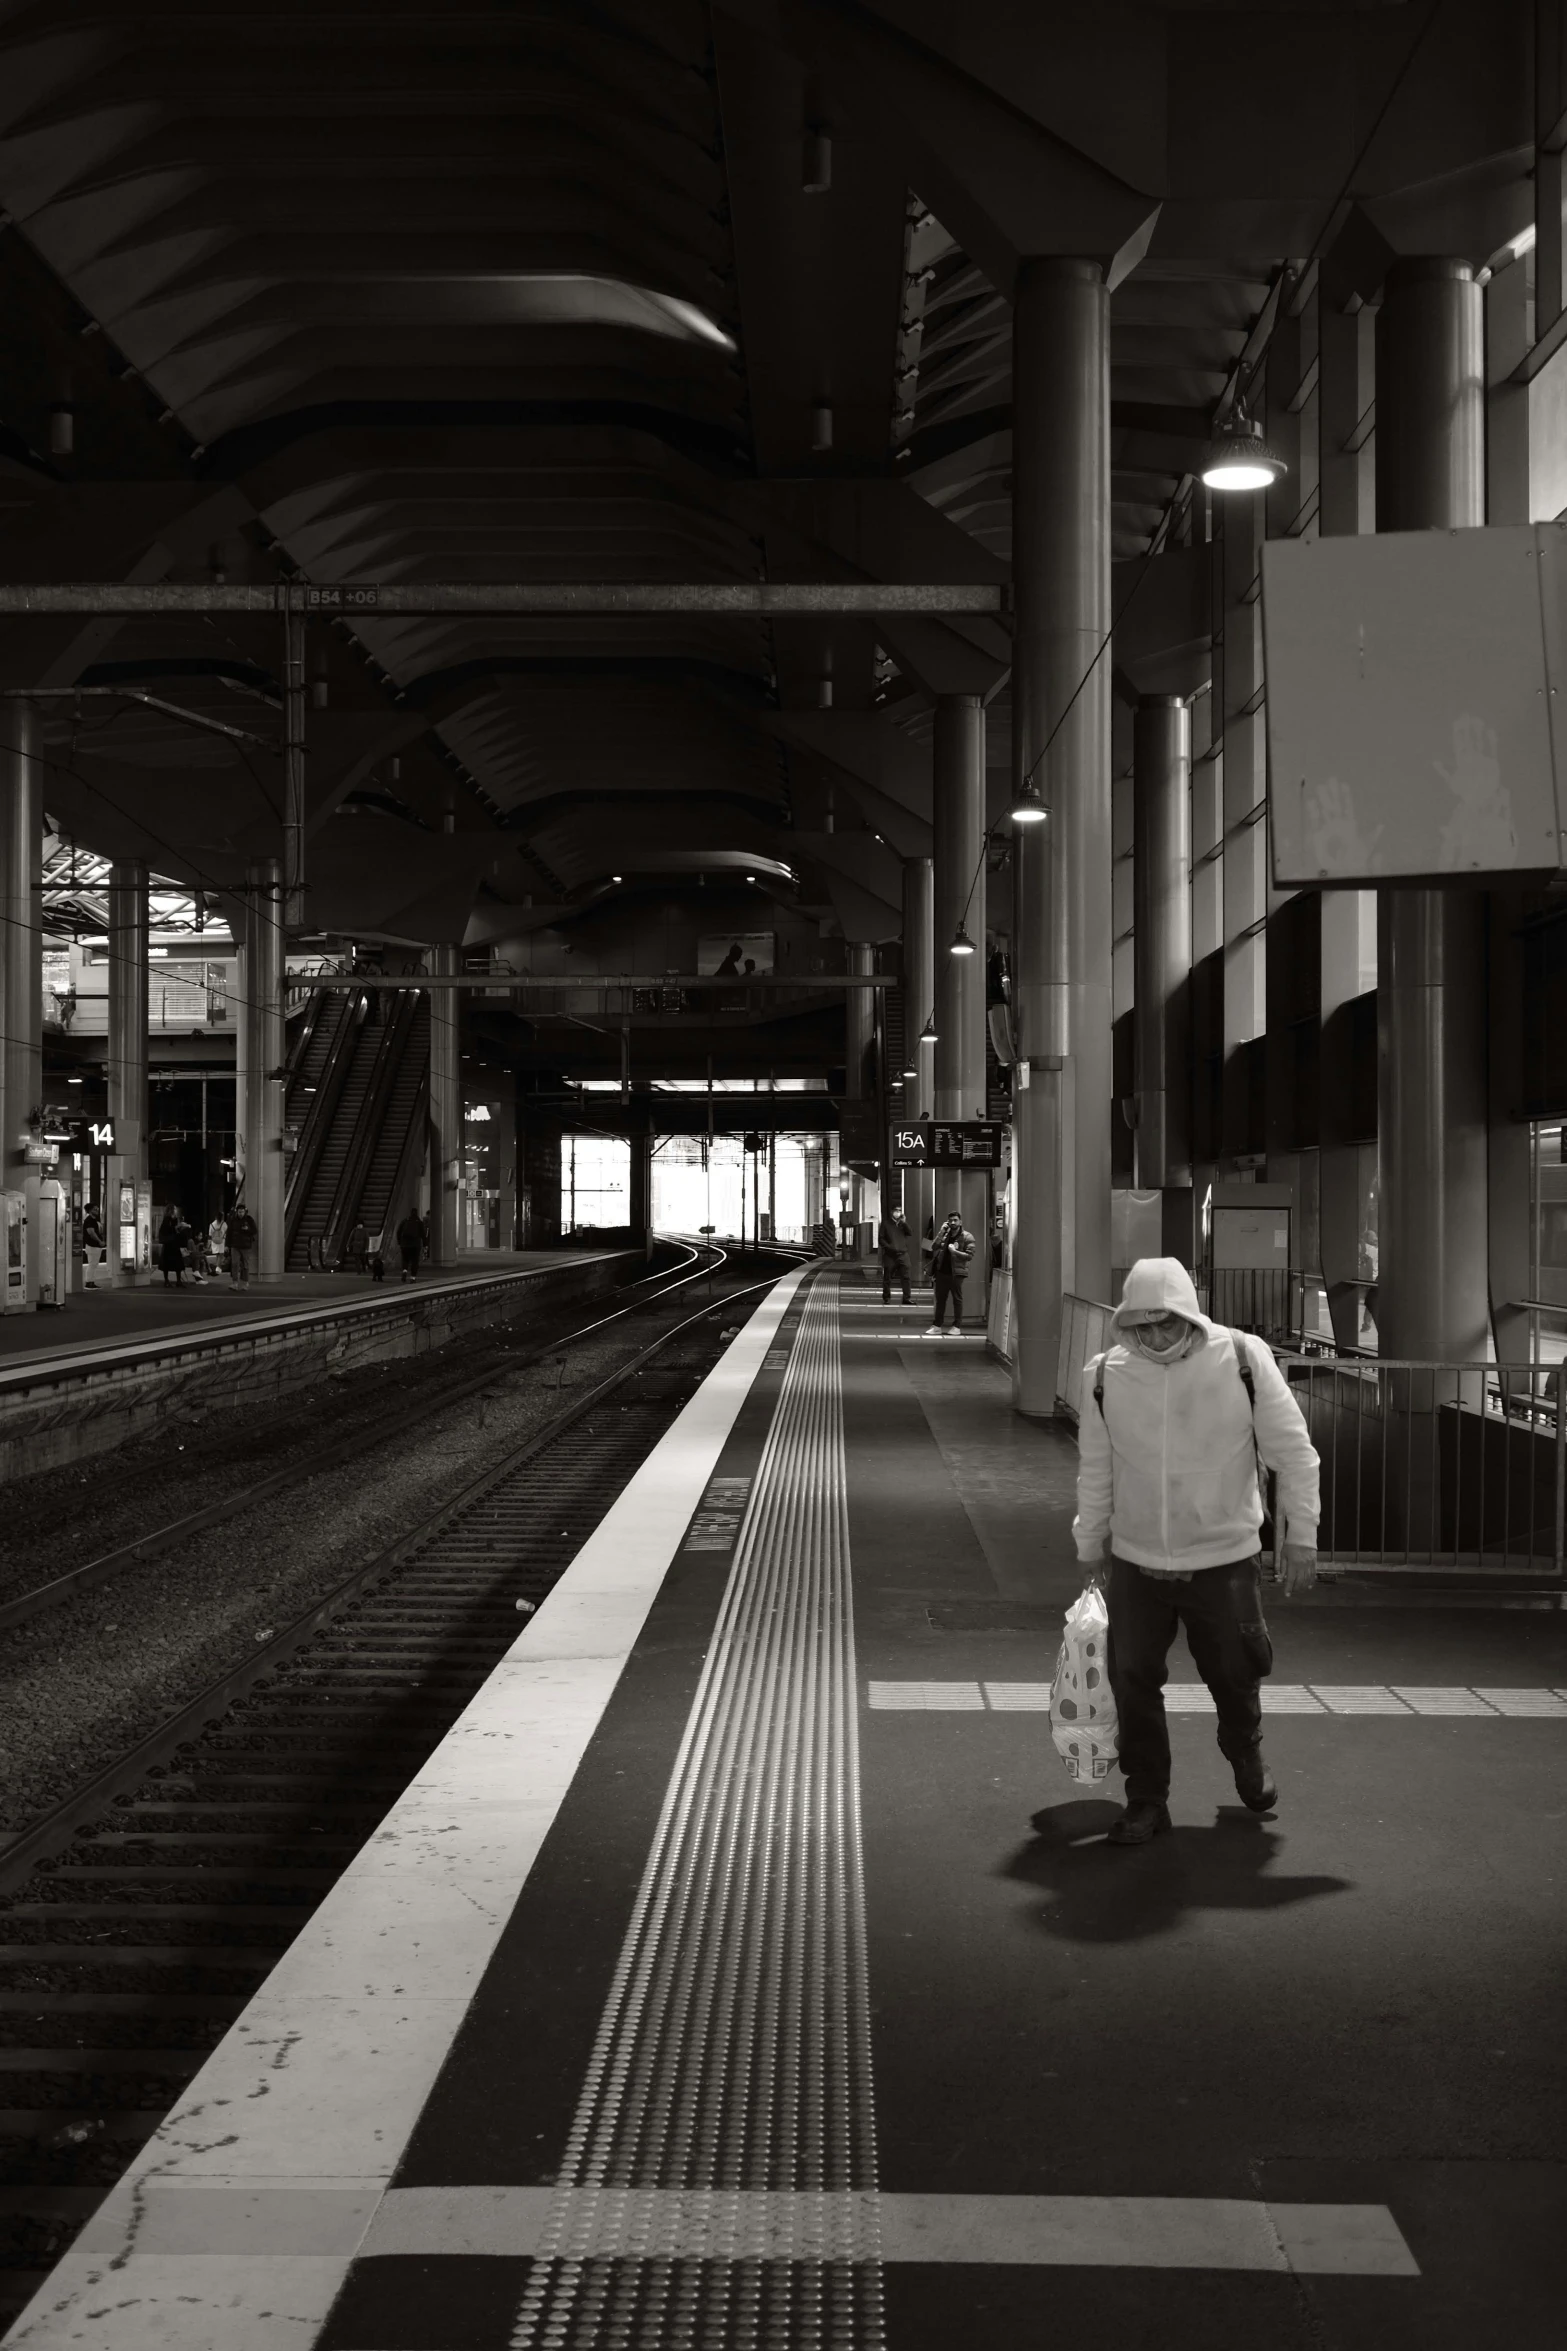 the man is waiting at a train station for his next ride